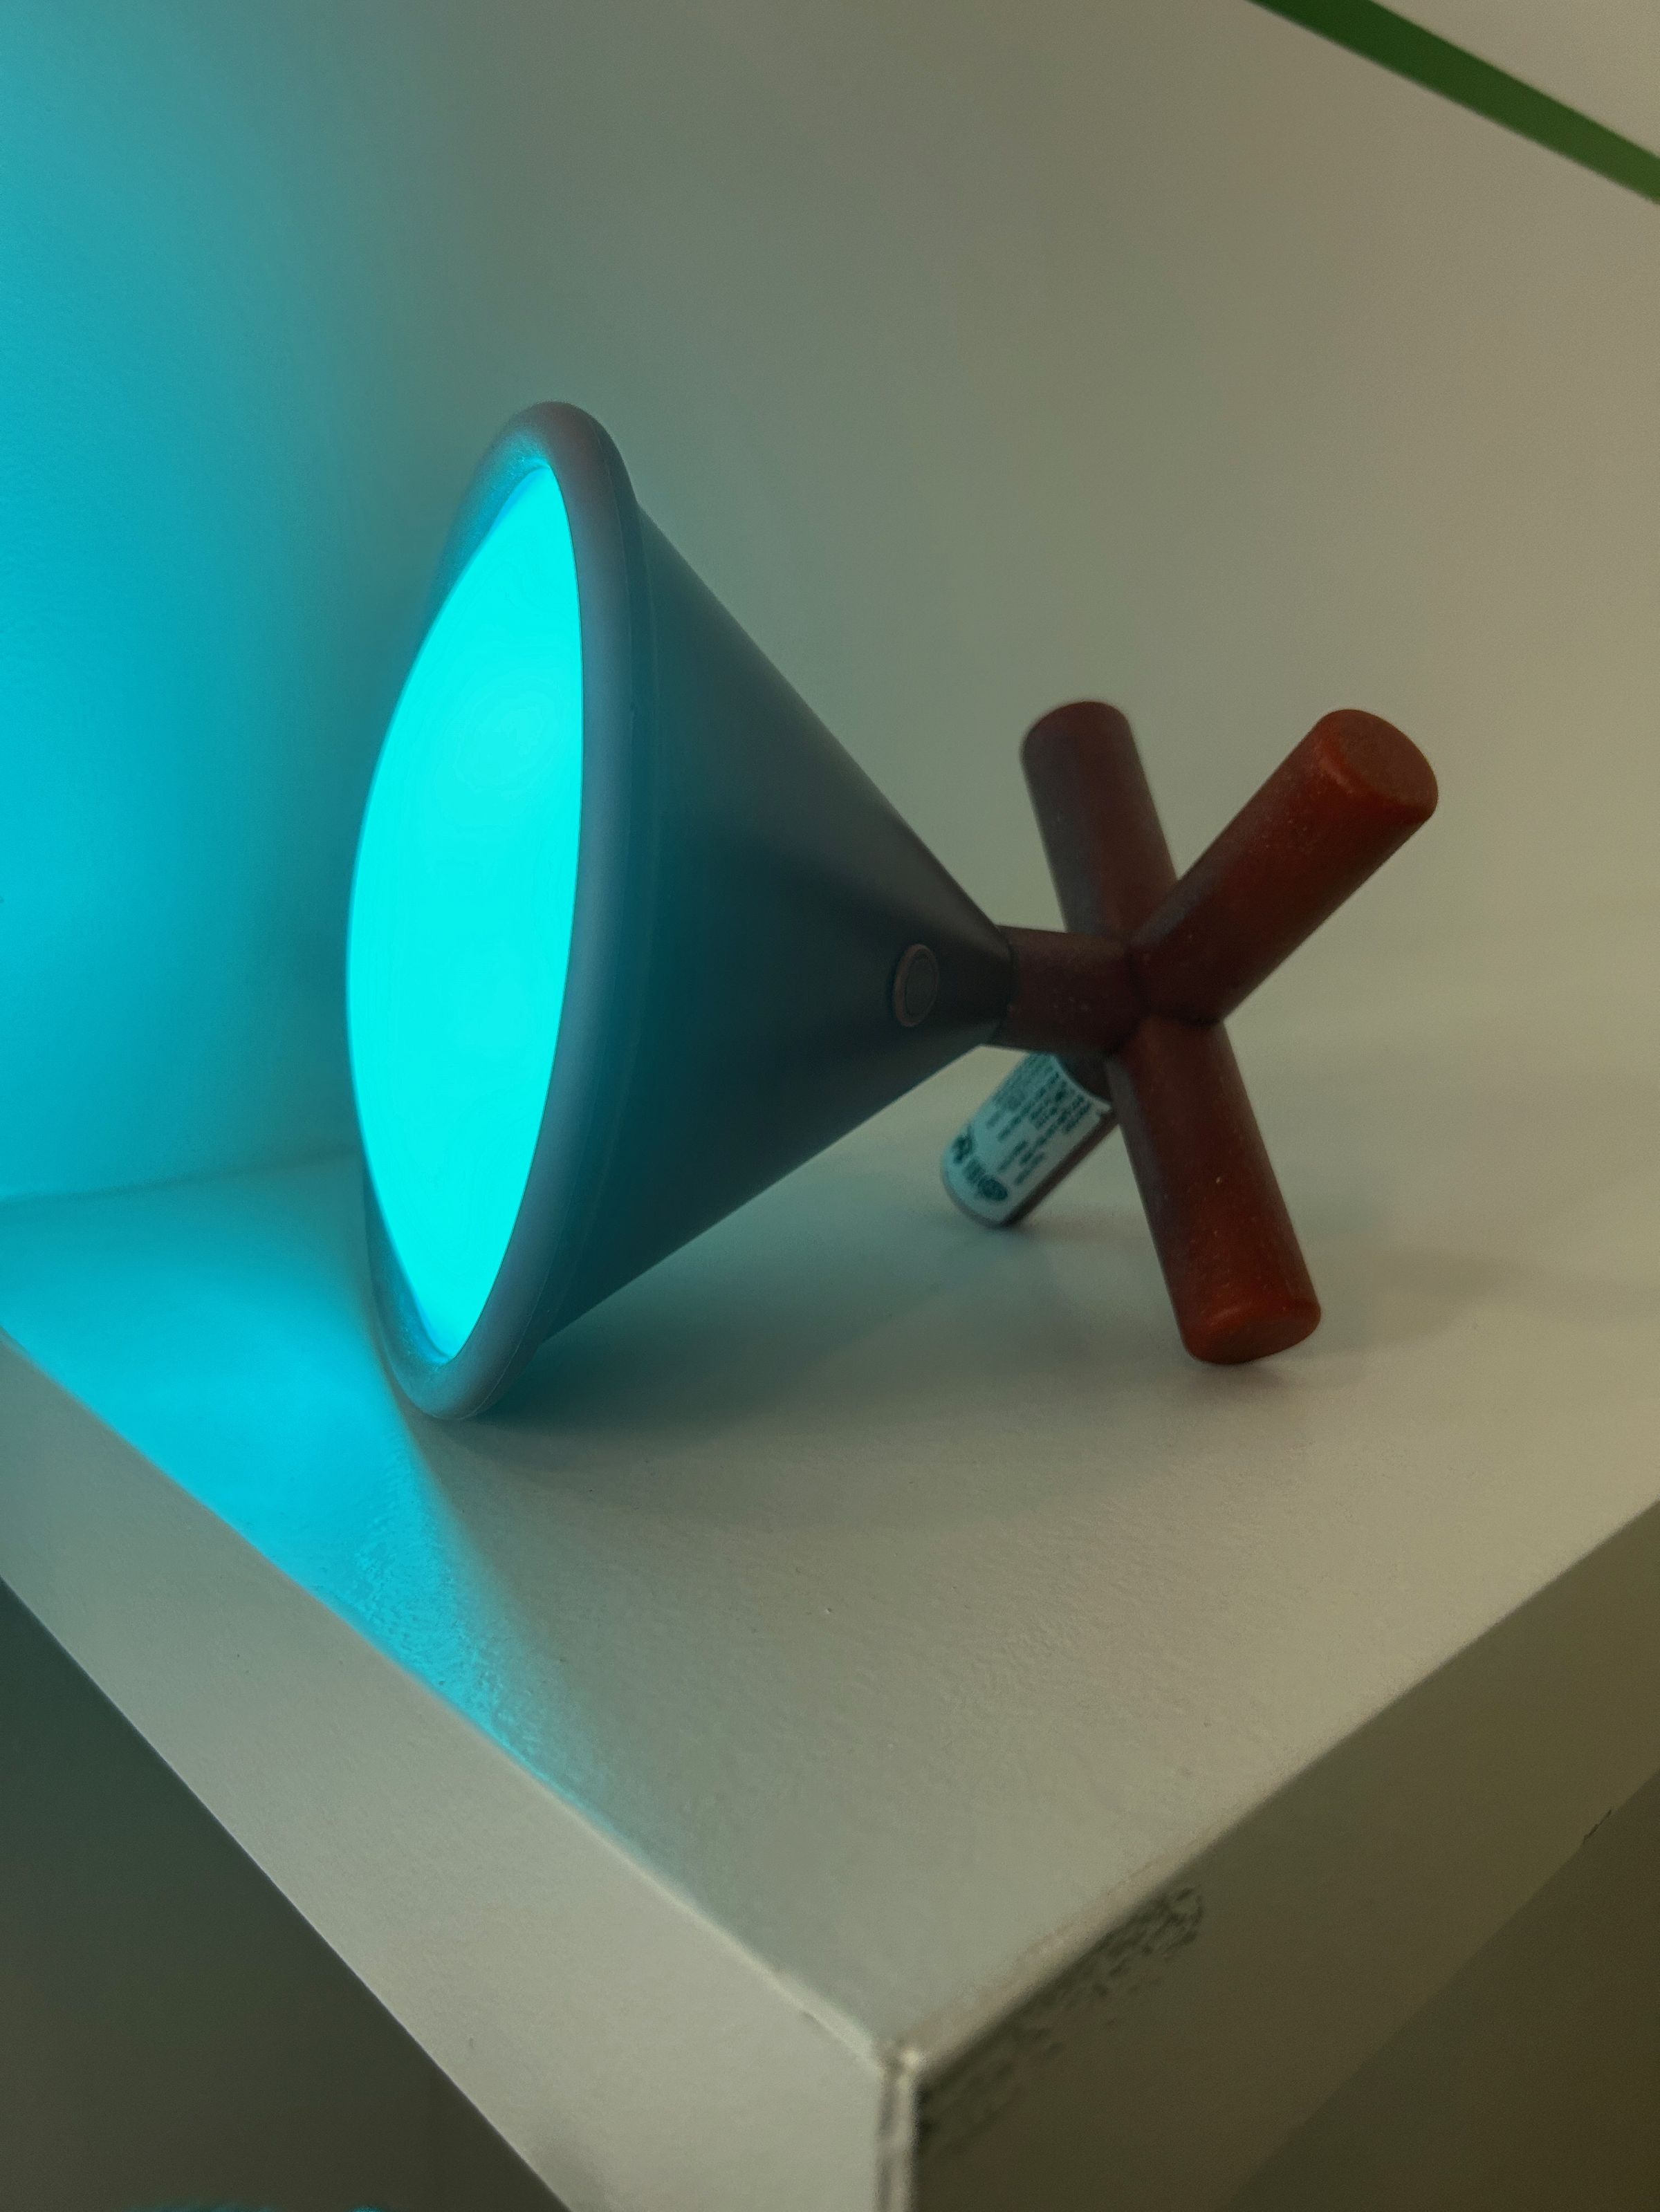 I can see some fun uses for this portable Nanoleaf light — including as a giant flashlight.